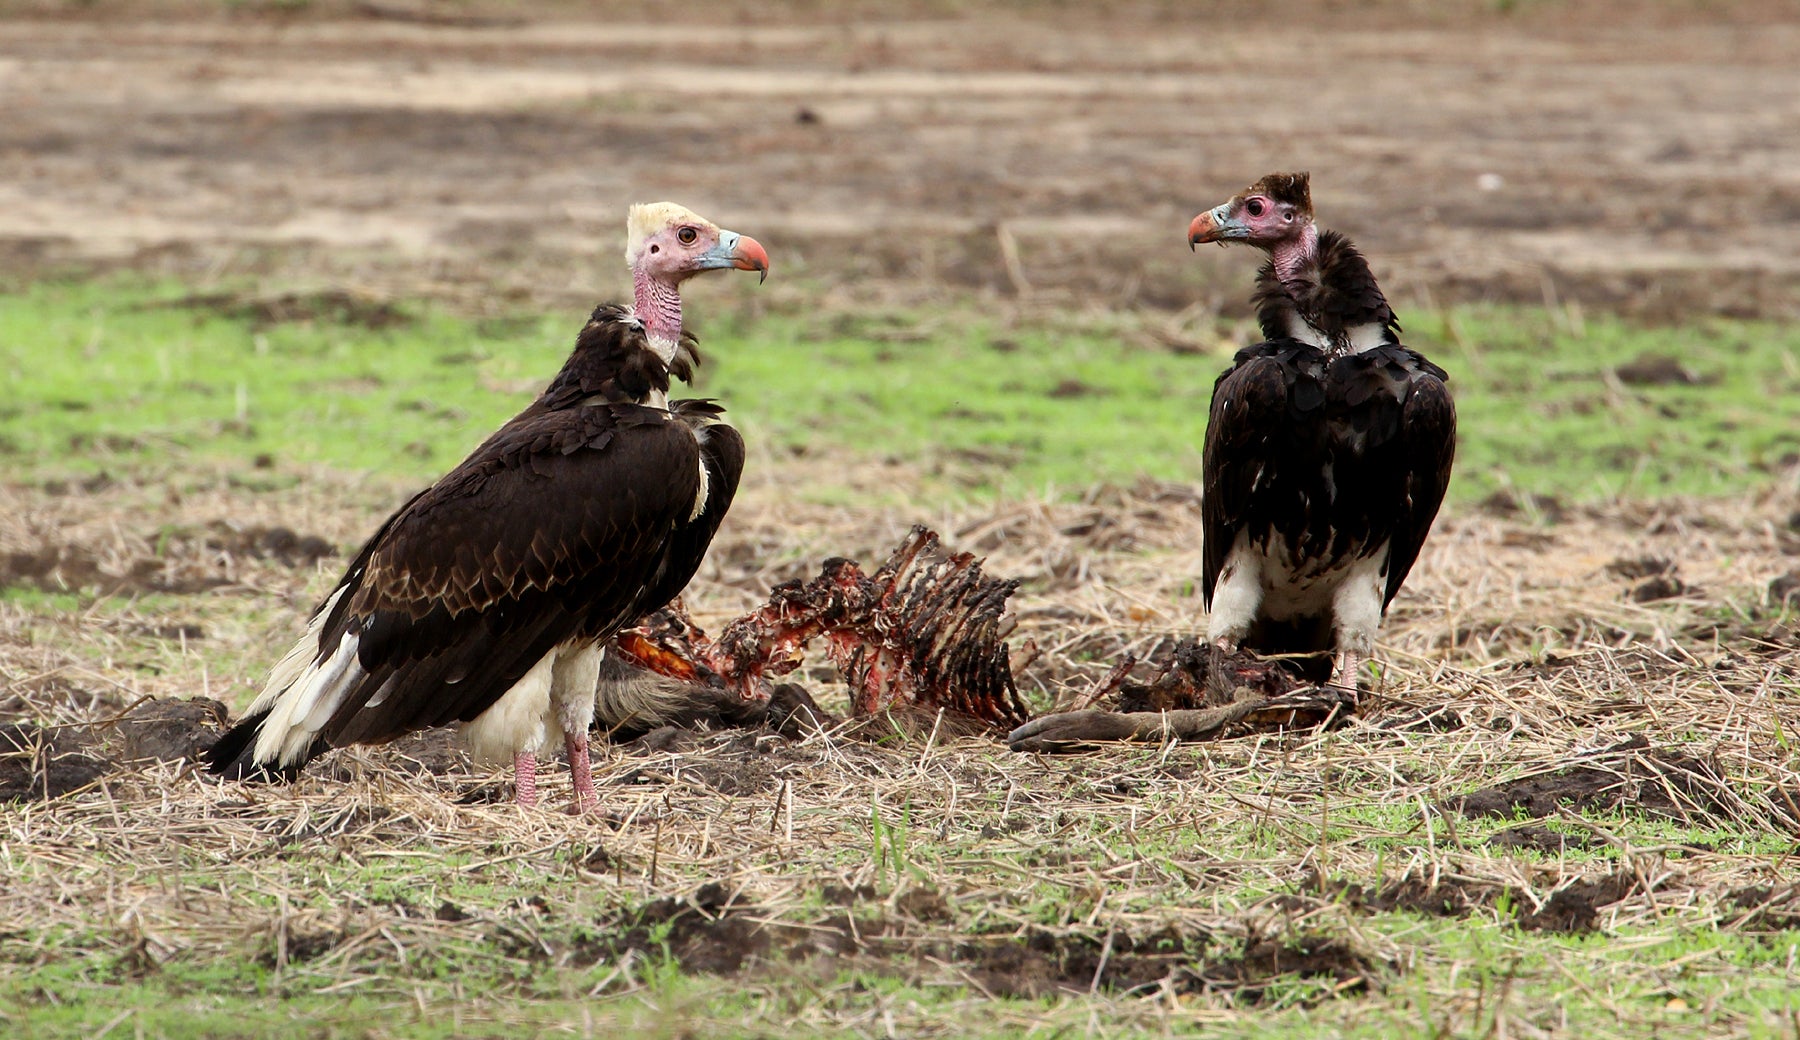 Two large birds, one with light colored head and the other with a dark colored head stand opposing each other with the remains of a dead animal in between them lying on the ground